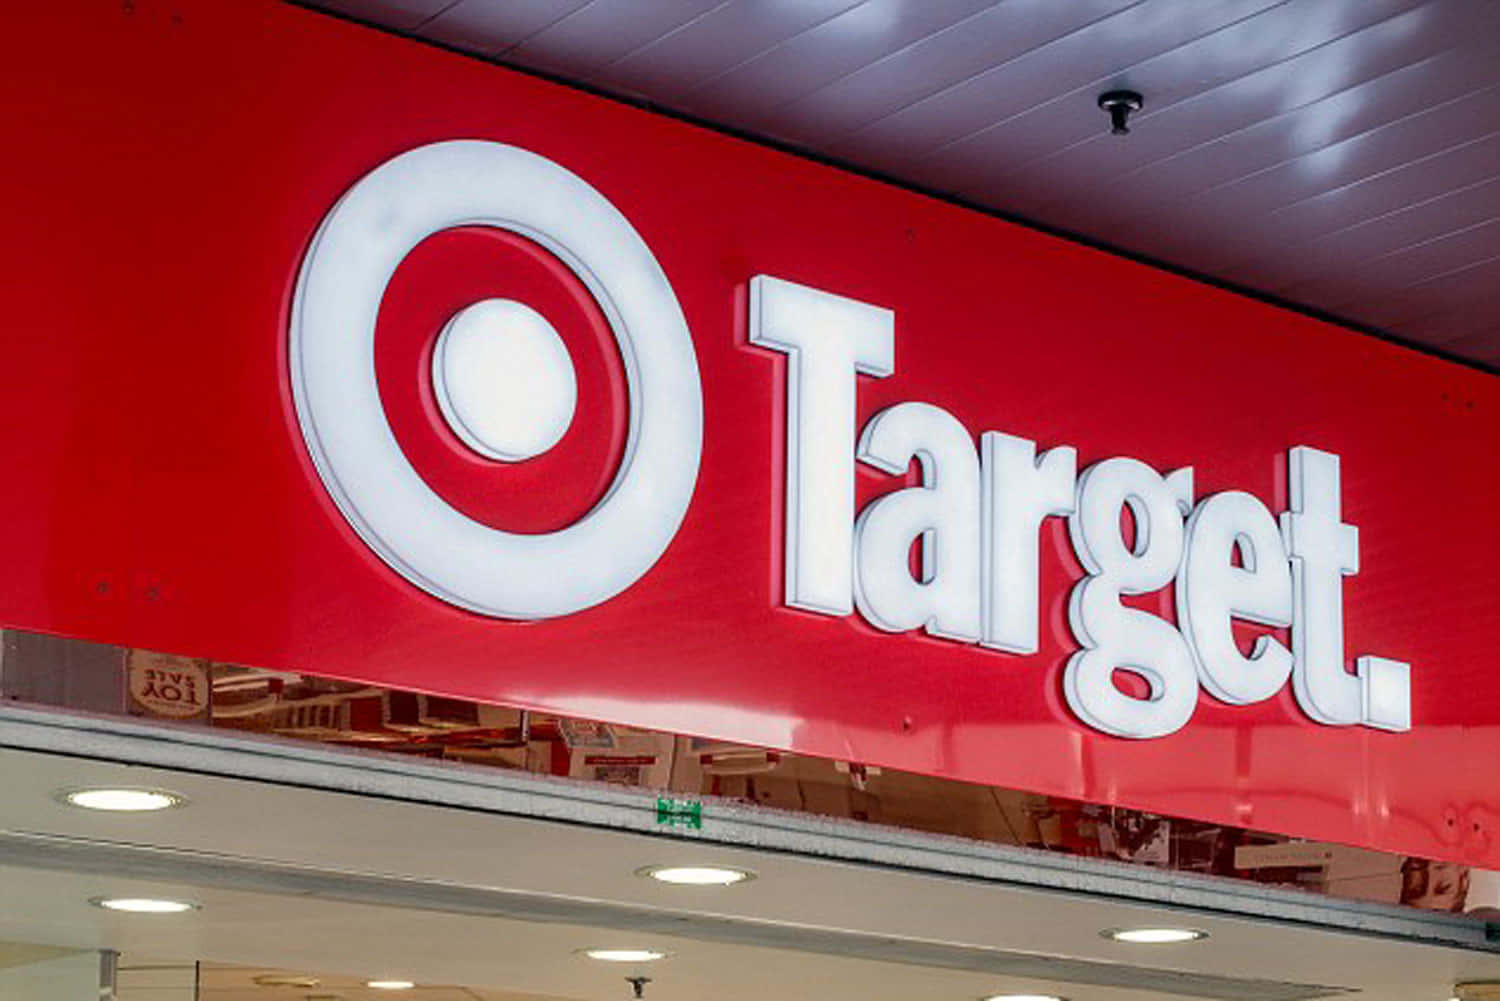 Download A Target Store With A Red Sign | Wallpapers.com